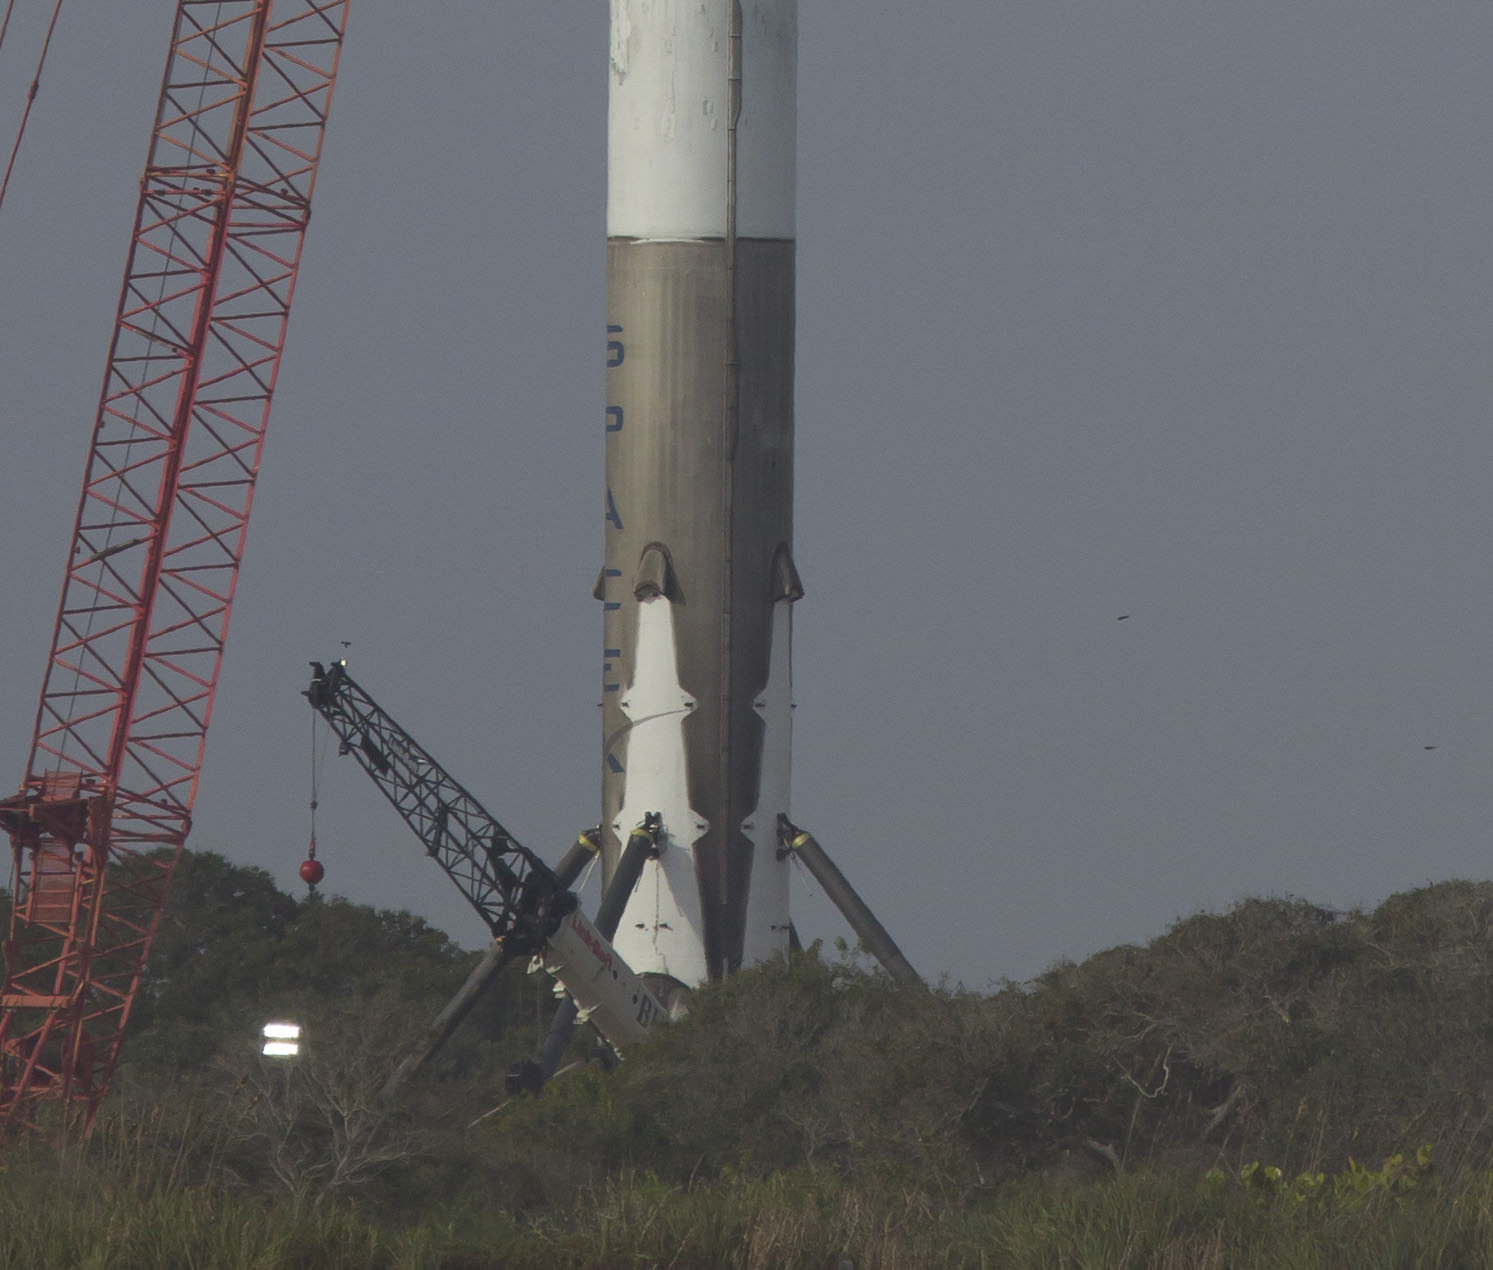 Up close post landing ocean view of landing legs at base of SpaceX Falcon 9 at Landing Zone 1 the day after stage touchdown at Landing Zone 1 on Dec 21, 2015 at Cape Canaveral, Fla.  Credit: Jeff Seibert/AmericaSpace